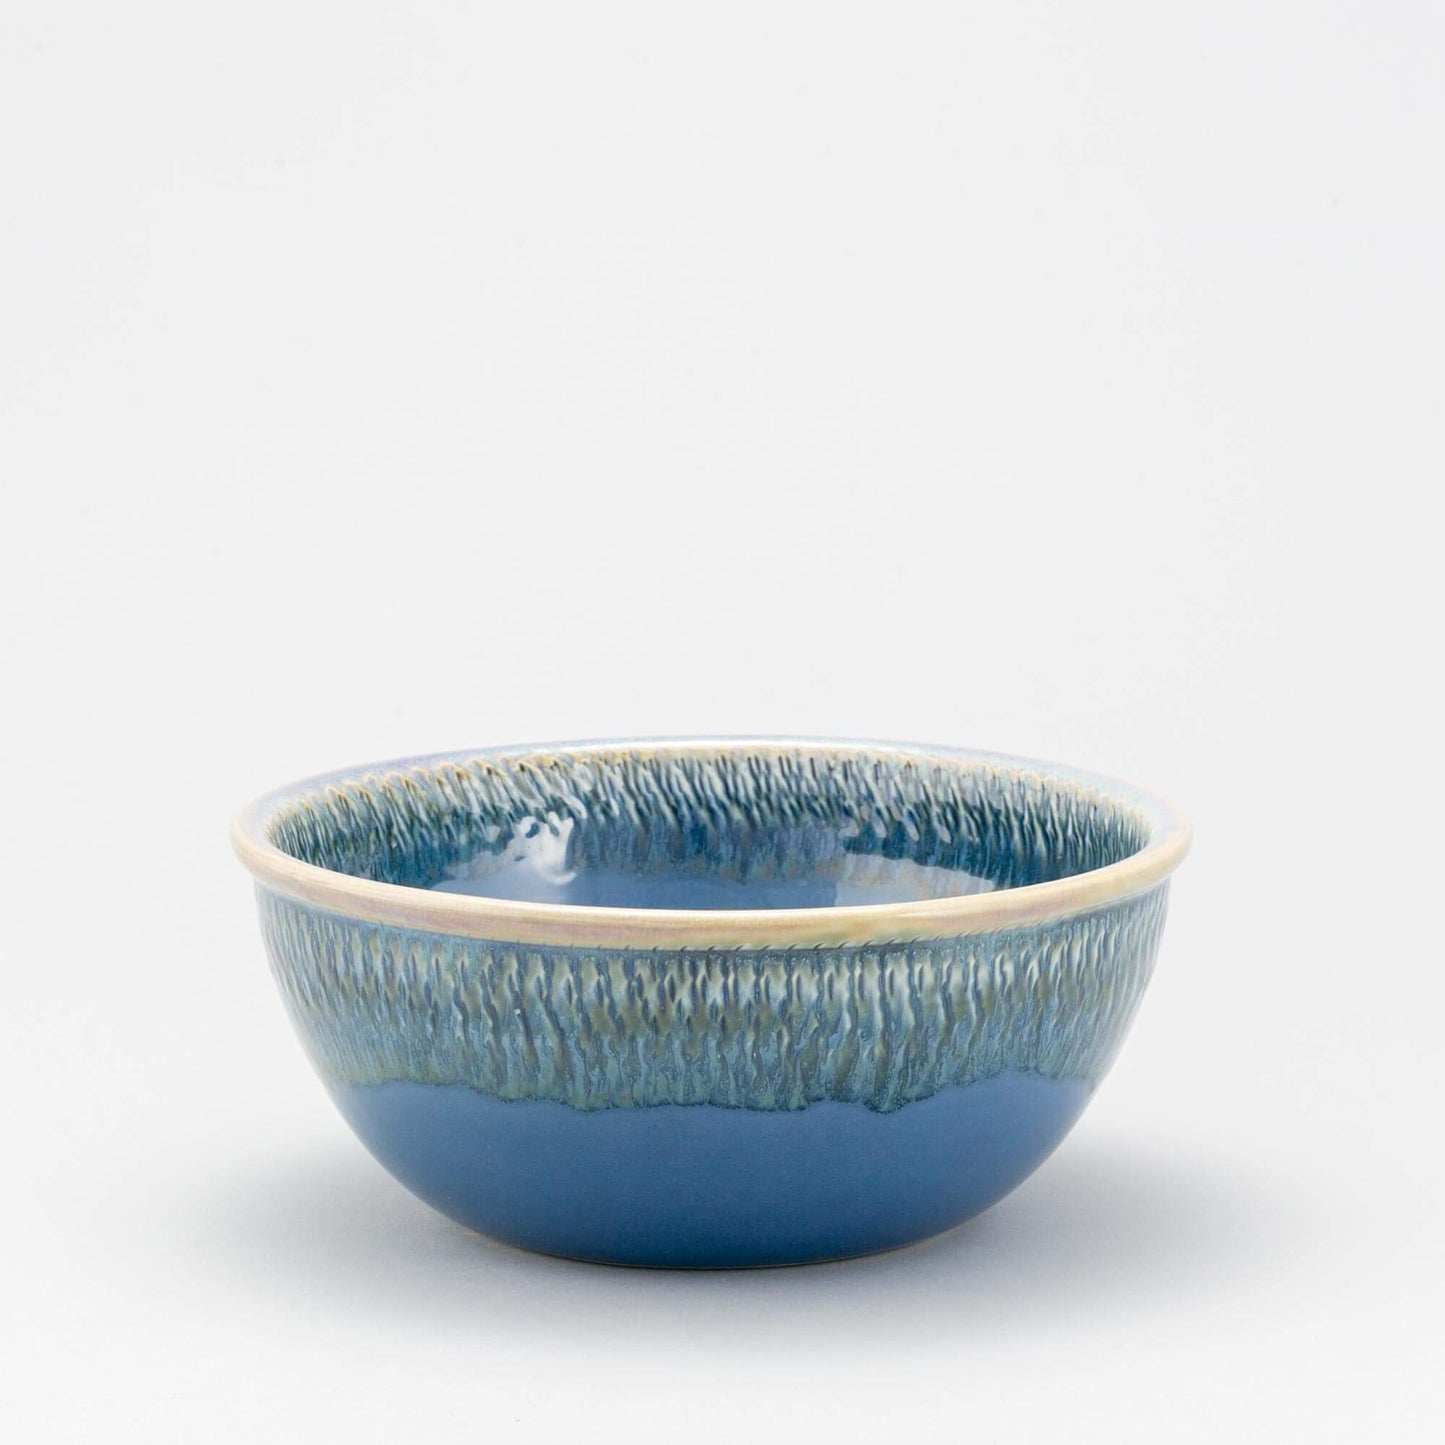 Handmade Pottery 10 Inch Mixing Bowl in Blue Oribe pattern made by Georgetown Pottery in Maine